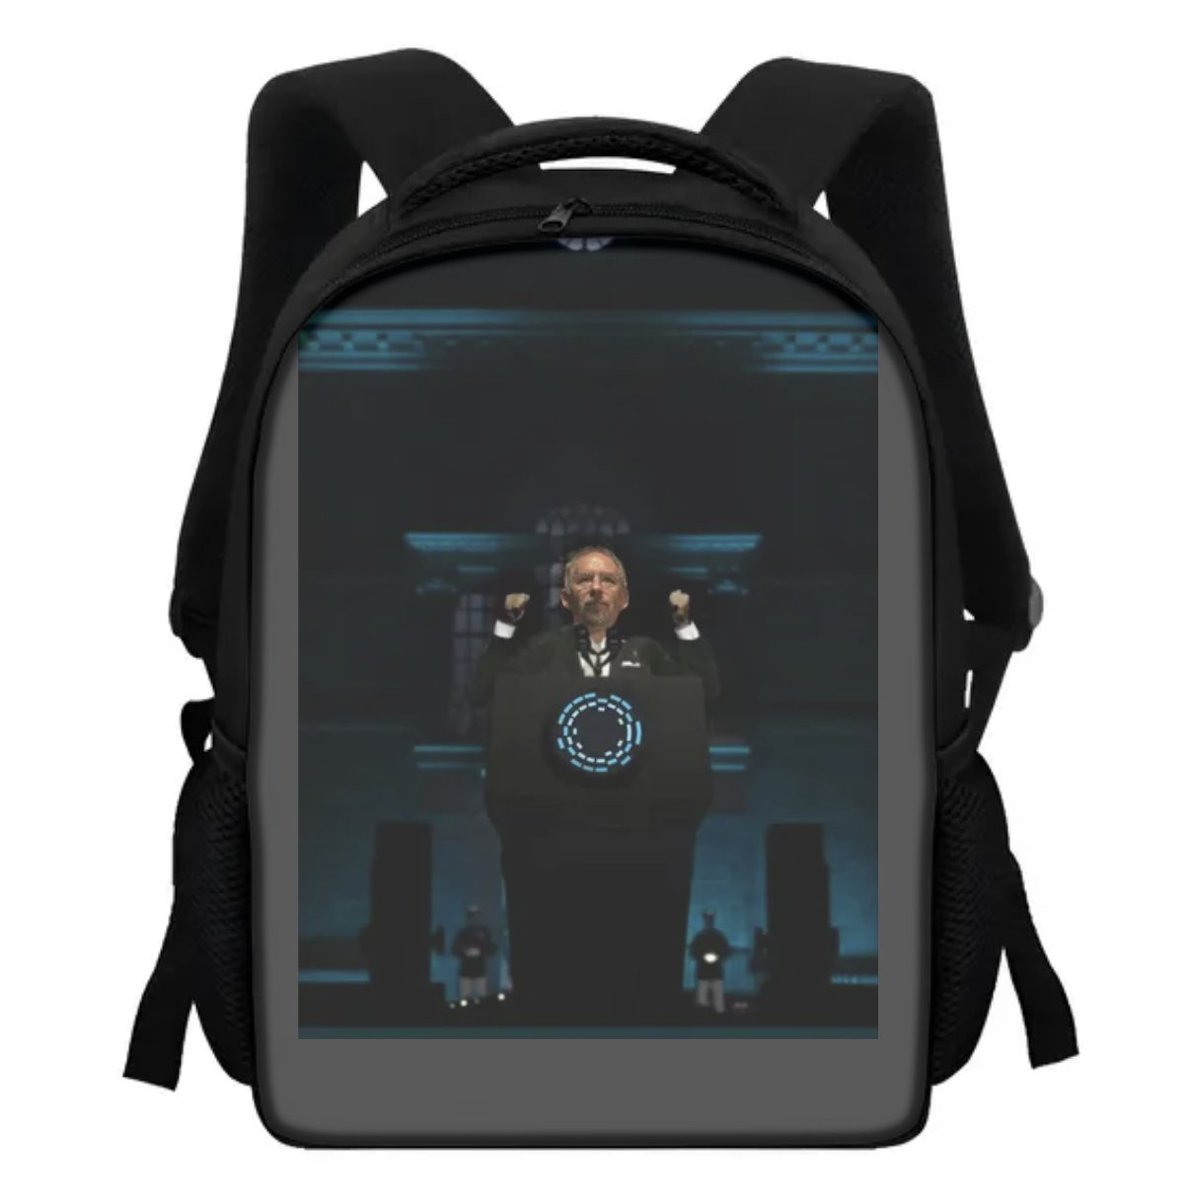 Coming soon to the @Blockstream store: The Adam Backpack